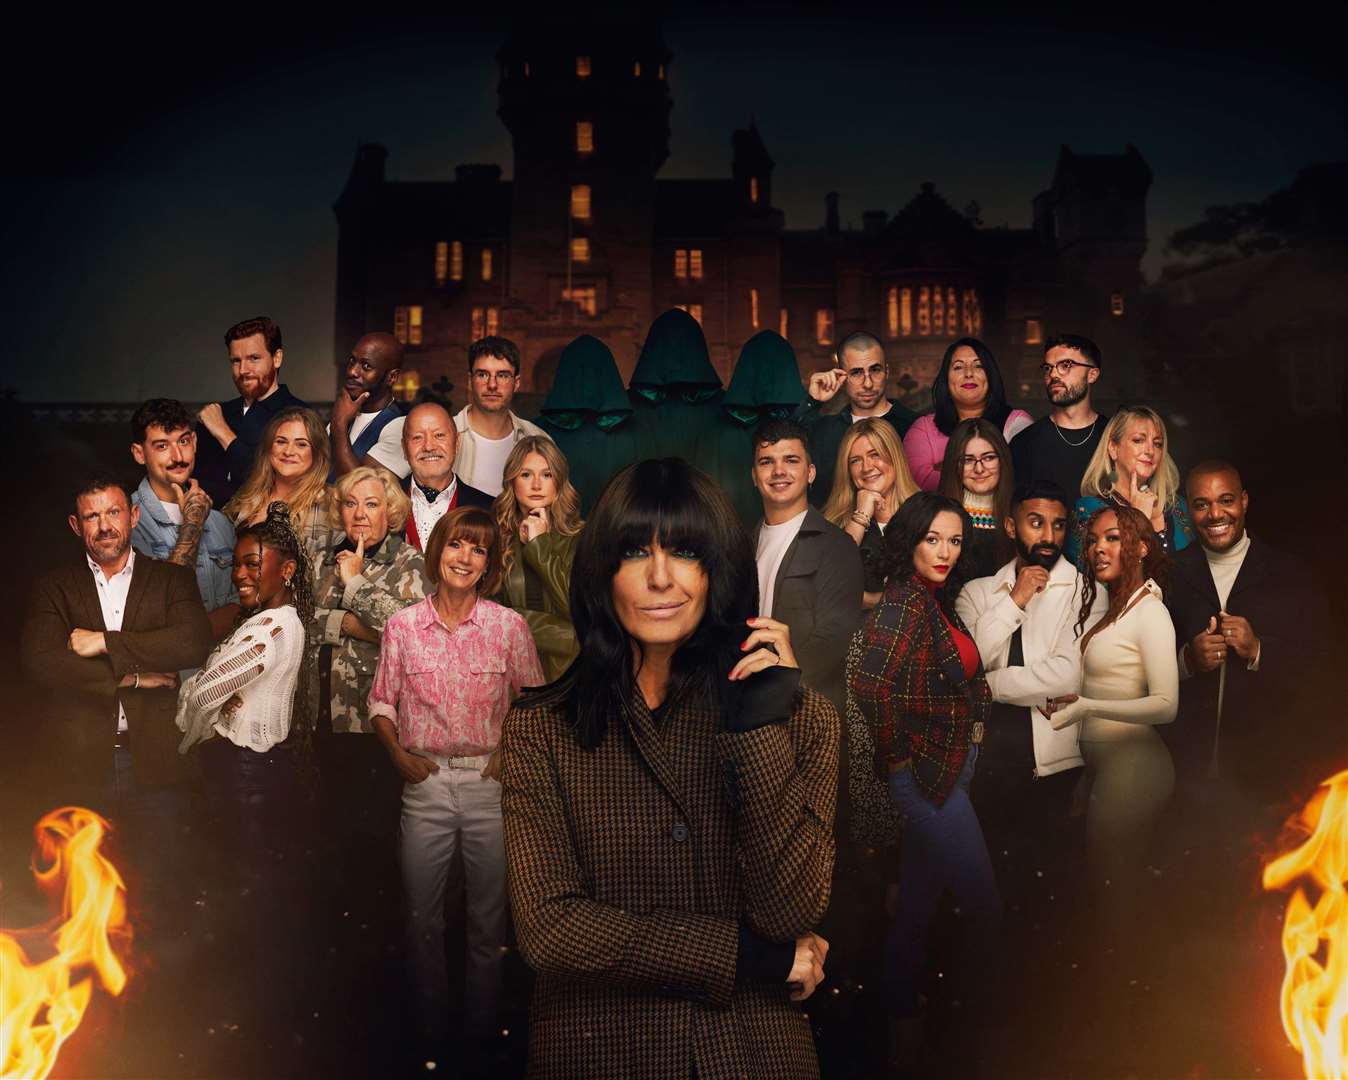 The Traitors is back on screen tonight. Before any murders or banishments, the picture shows: Andrew, Jonny, Paul, Jasmine, Charlie, Anthony, Sonja, Aubrey, Diane, Brian, Mollie, Claudia Winkleman, Harry, Zack, Evie, Charlotte, Ash, Meg, Jaz, Kyra, Ross, Tracey and Miles. Picture: Studio Lambert,Mark Mainz